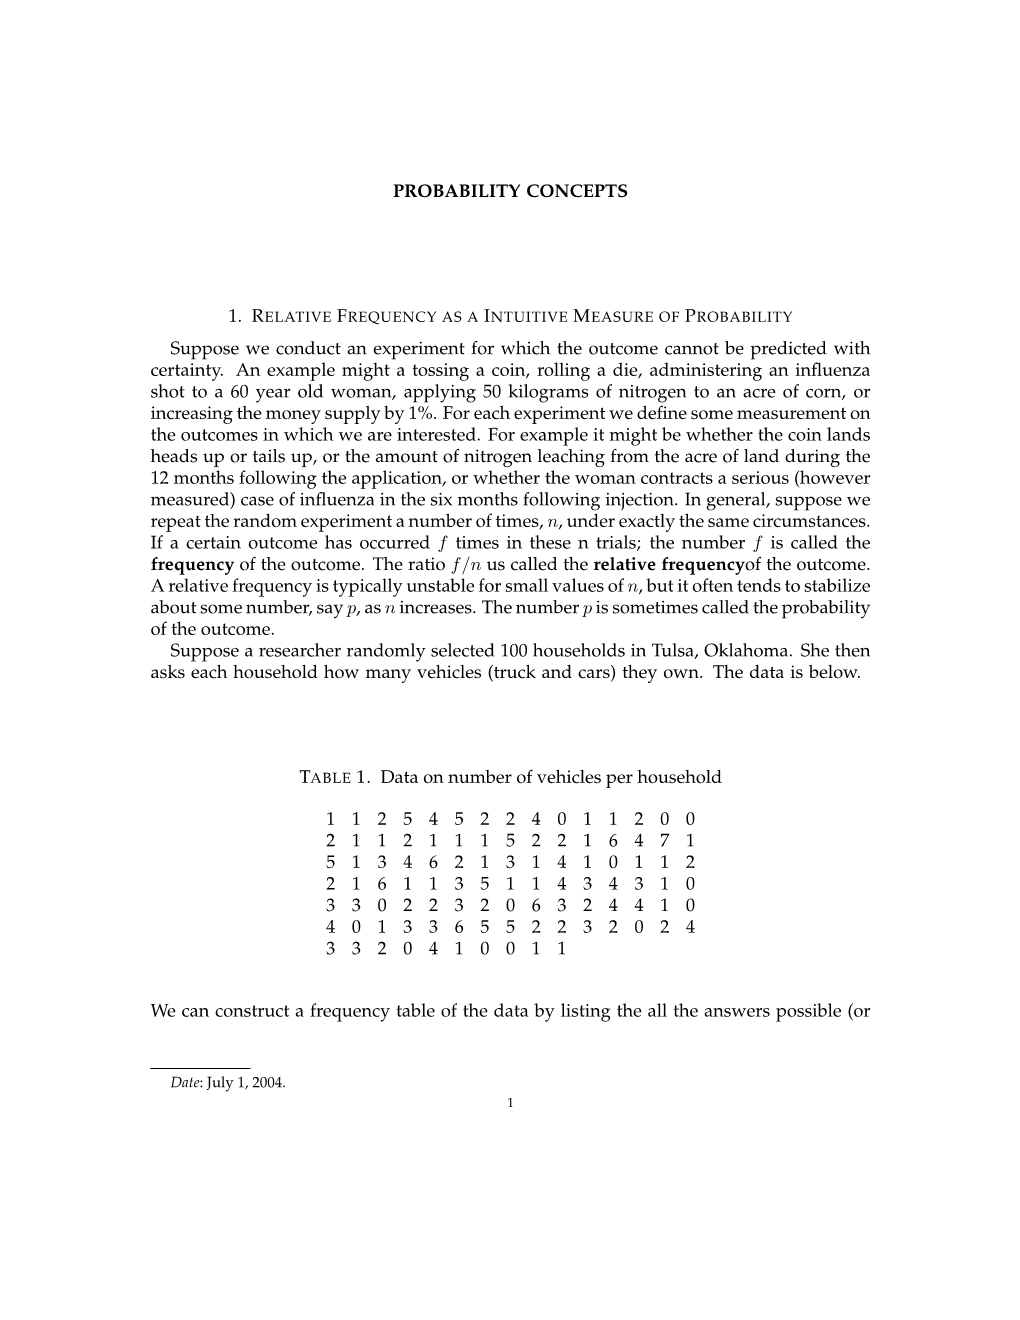 PROBABILITY CONCEPTS Suppose We Conduct an Experiment for Which